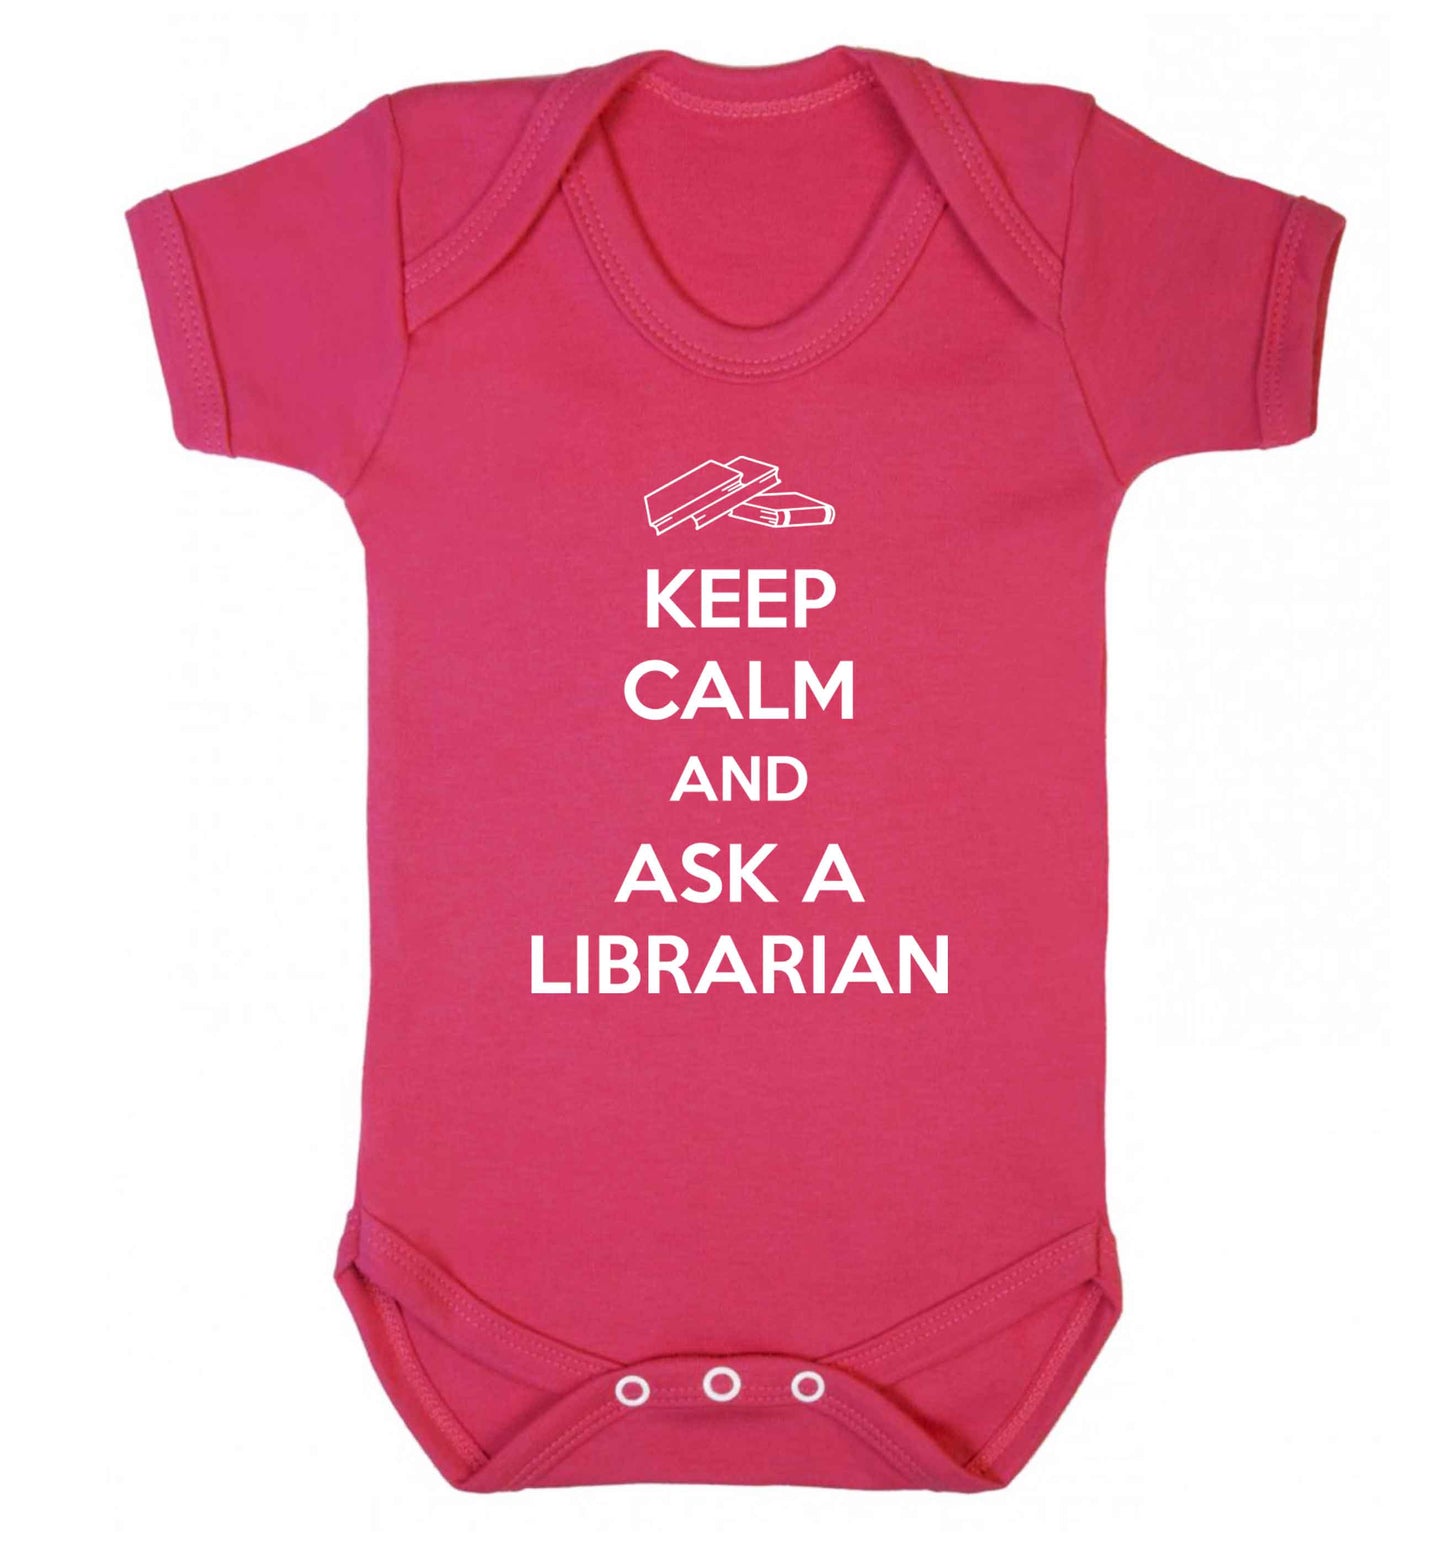 Keep calm and ask a librarian Baby Vest dark pink 18-24 months